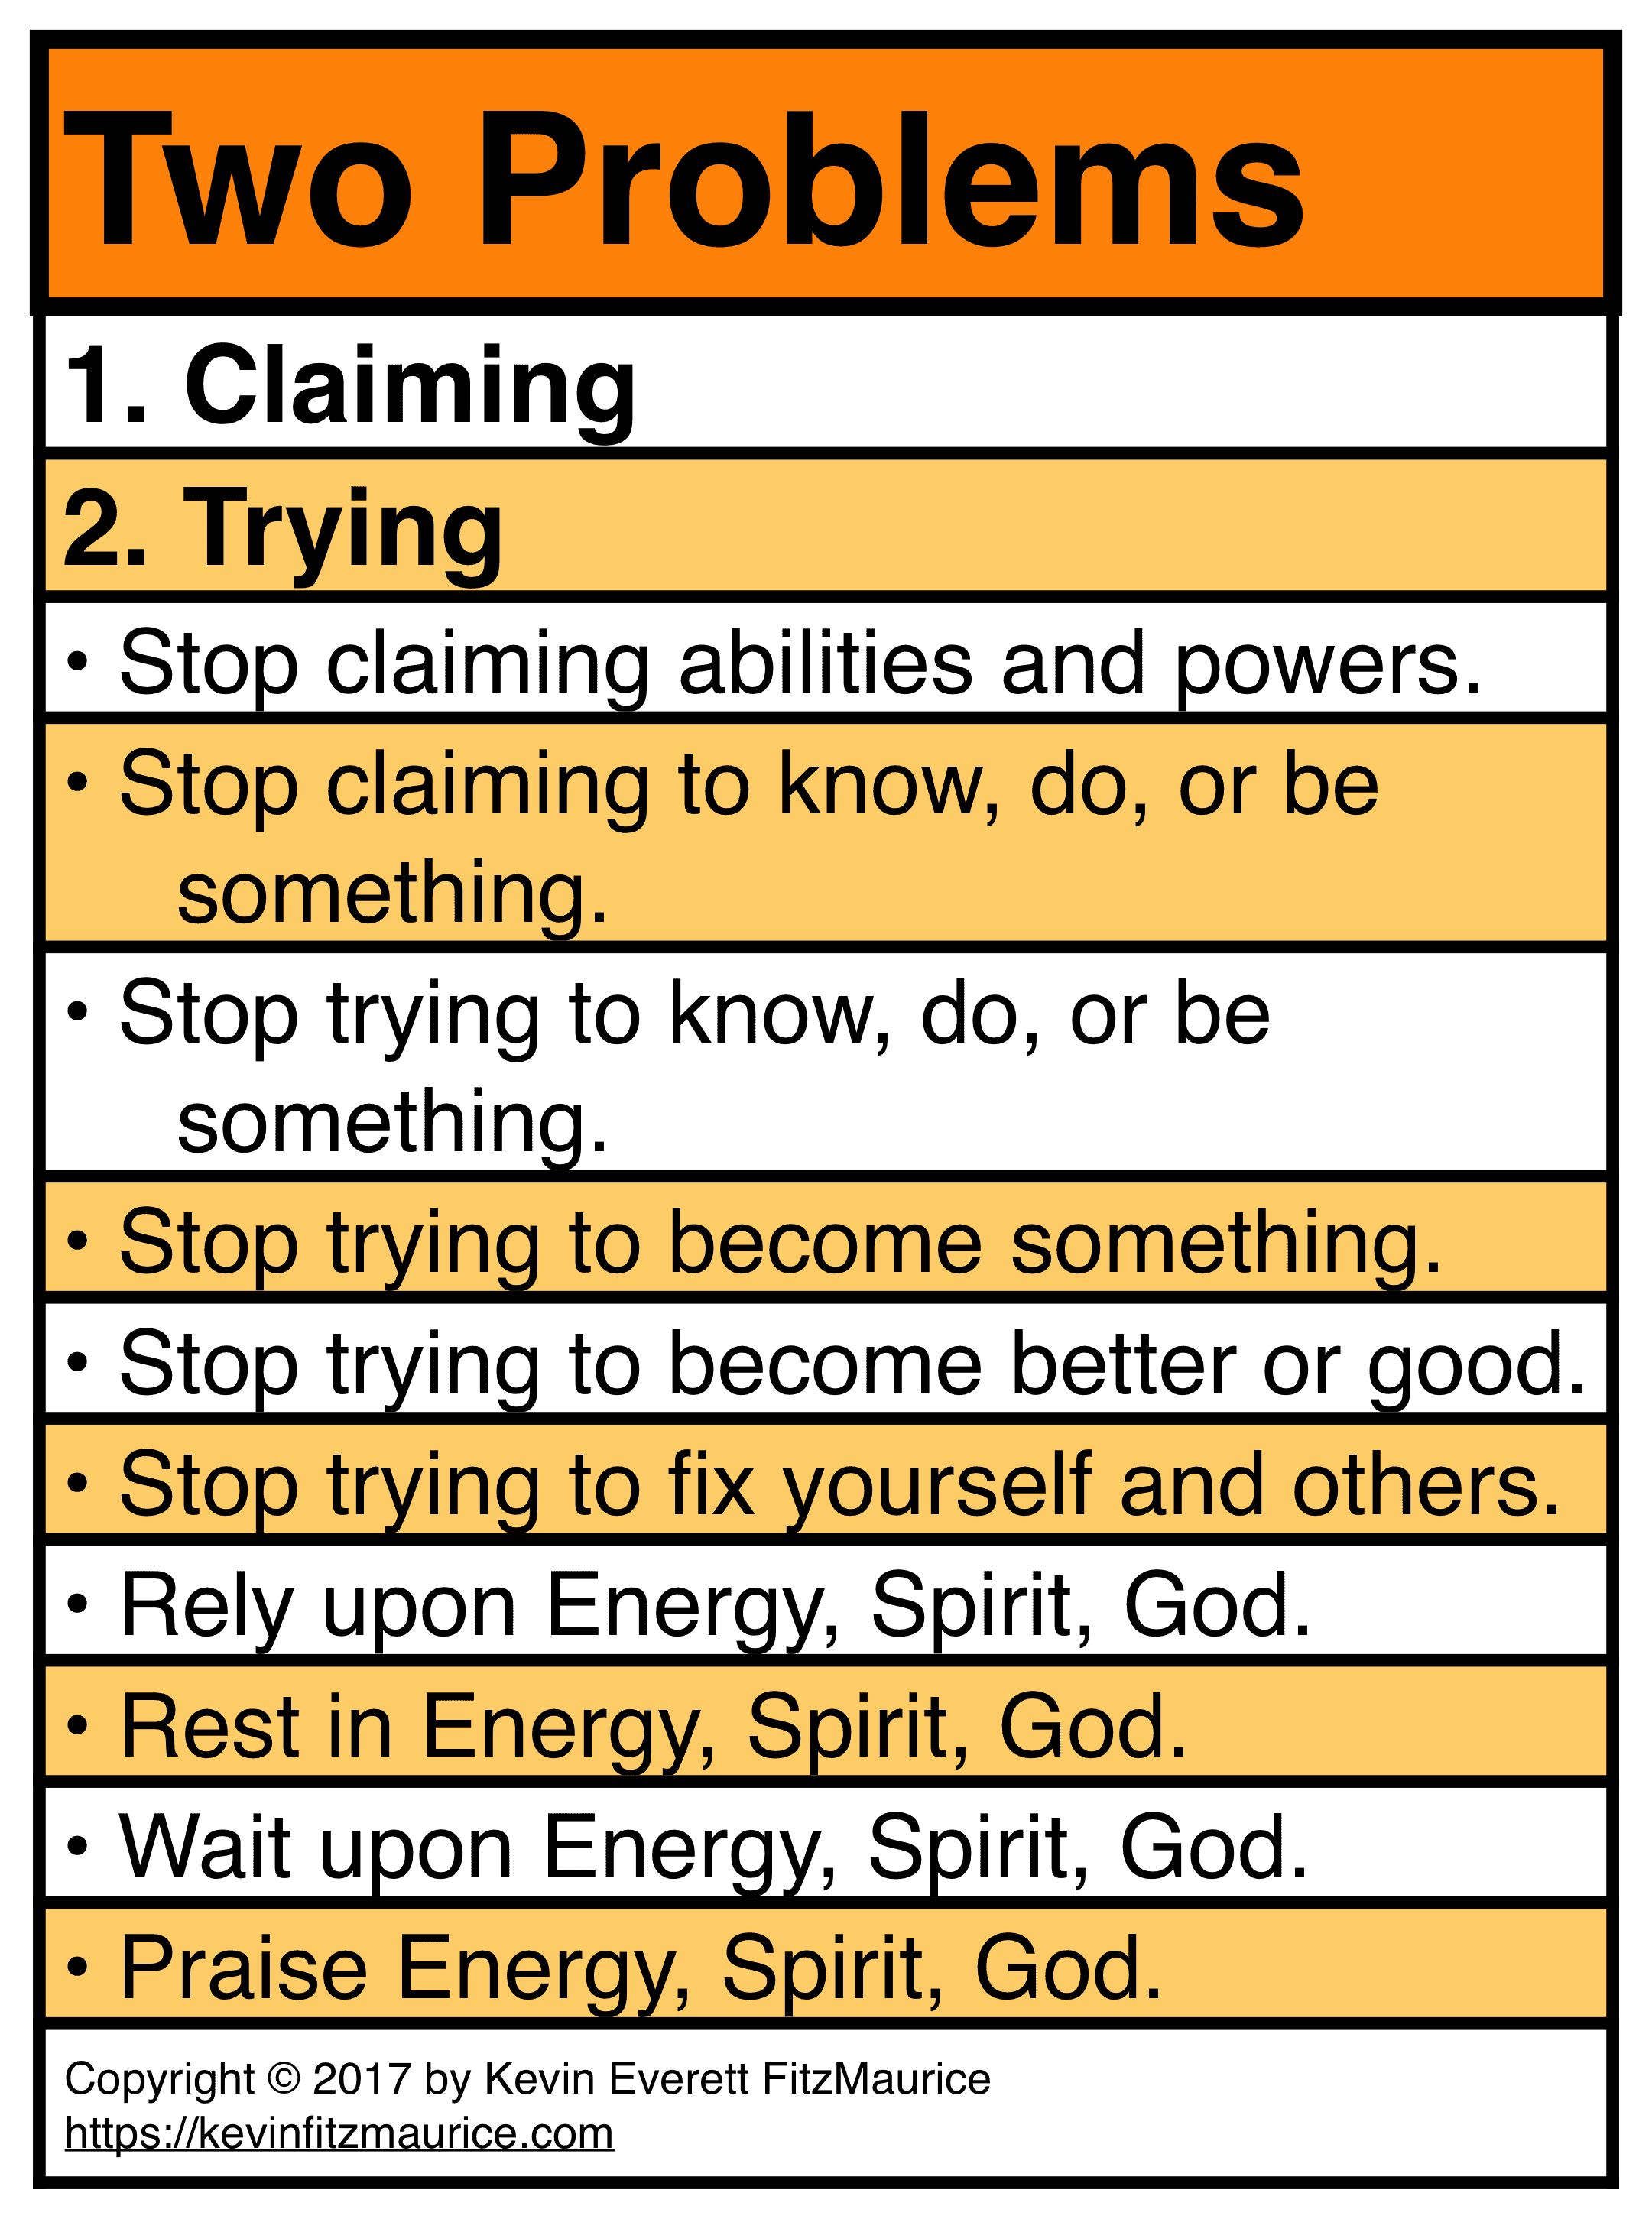 2 Problems of Claiming & Trying